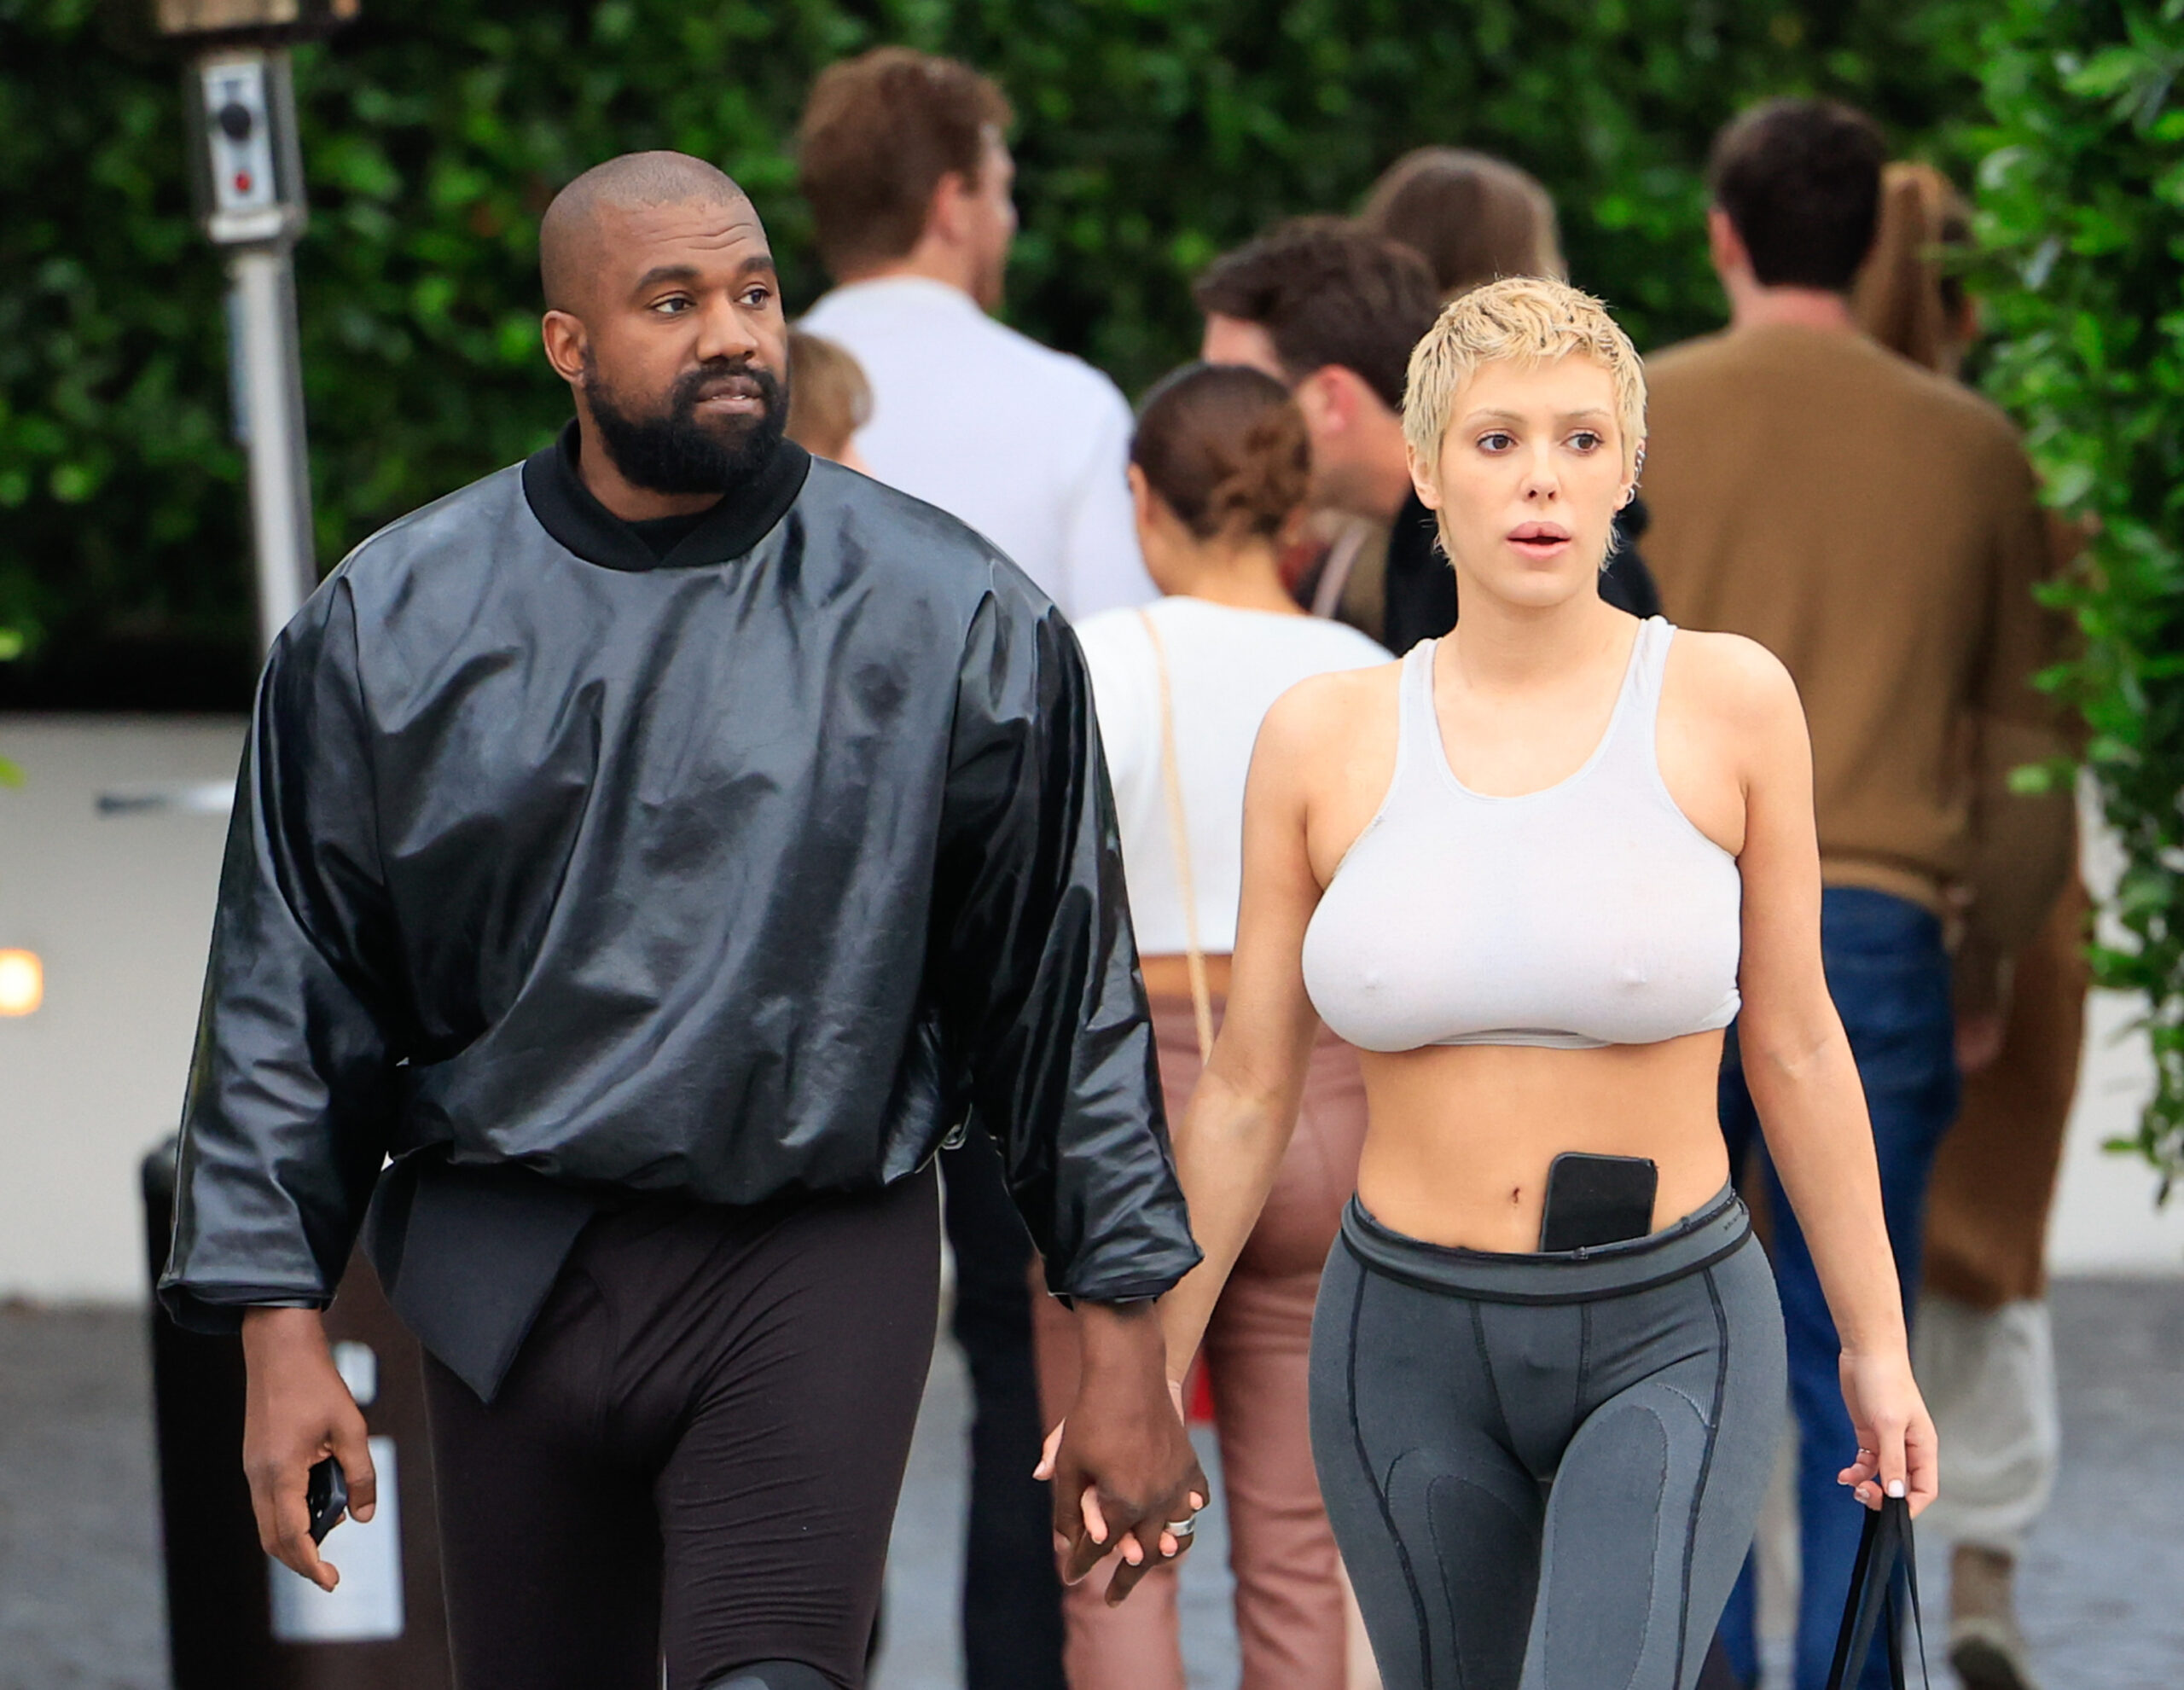 Kanye West & Bianca Censori Attract Massive Crowd In Italy Thanks To Impromptu Photoshoot